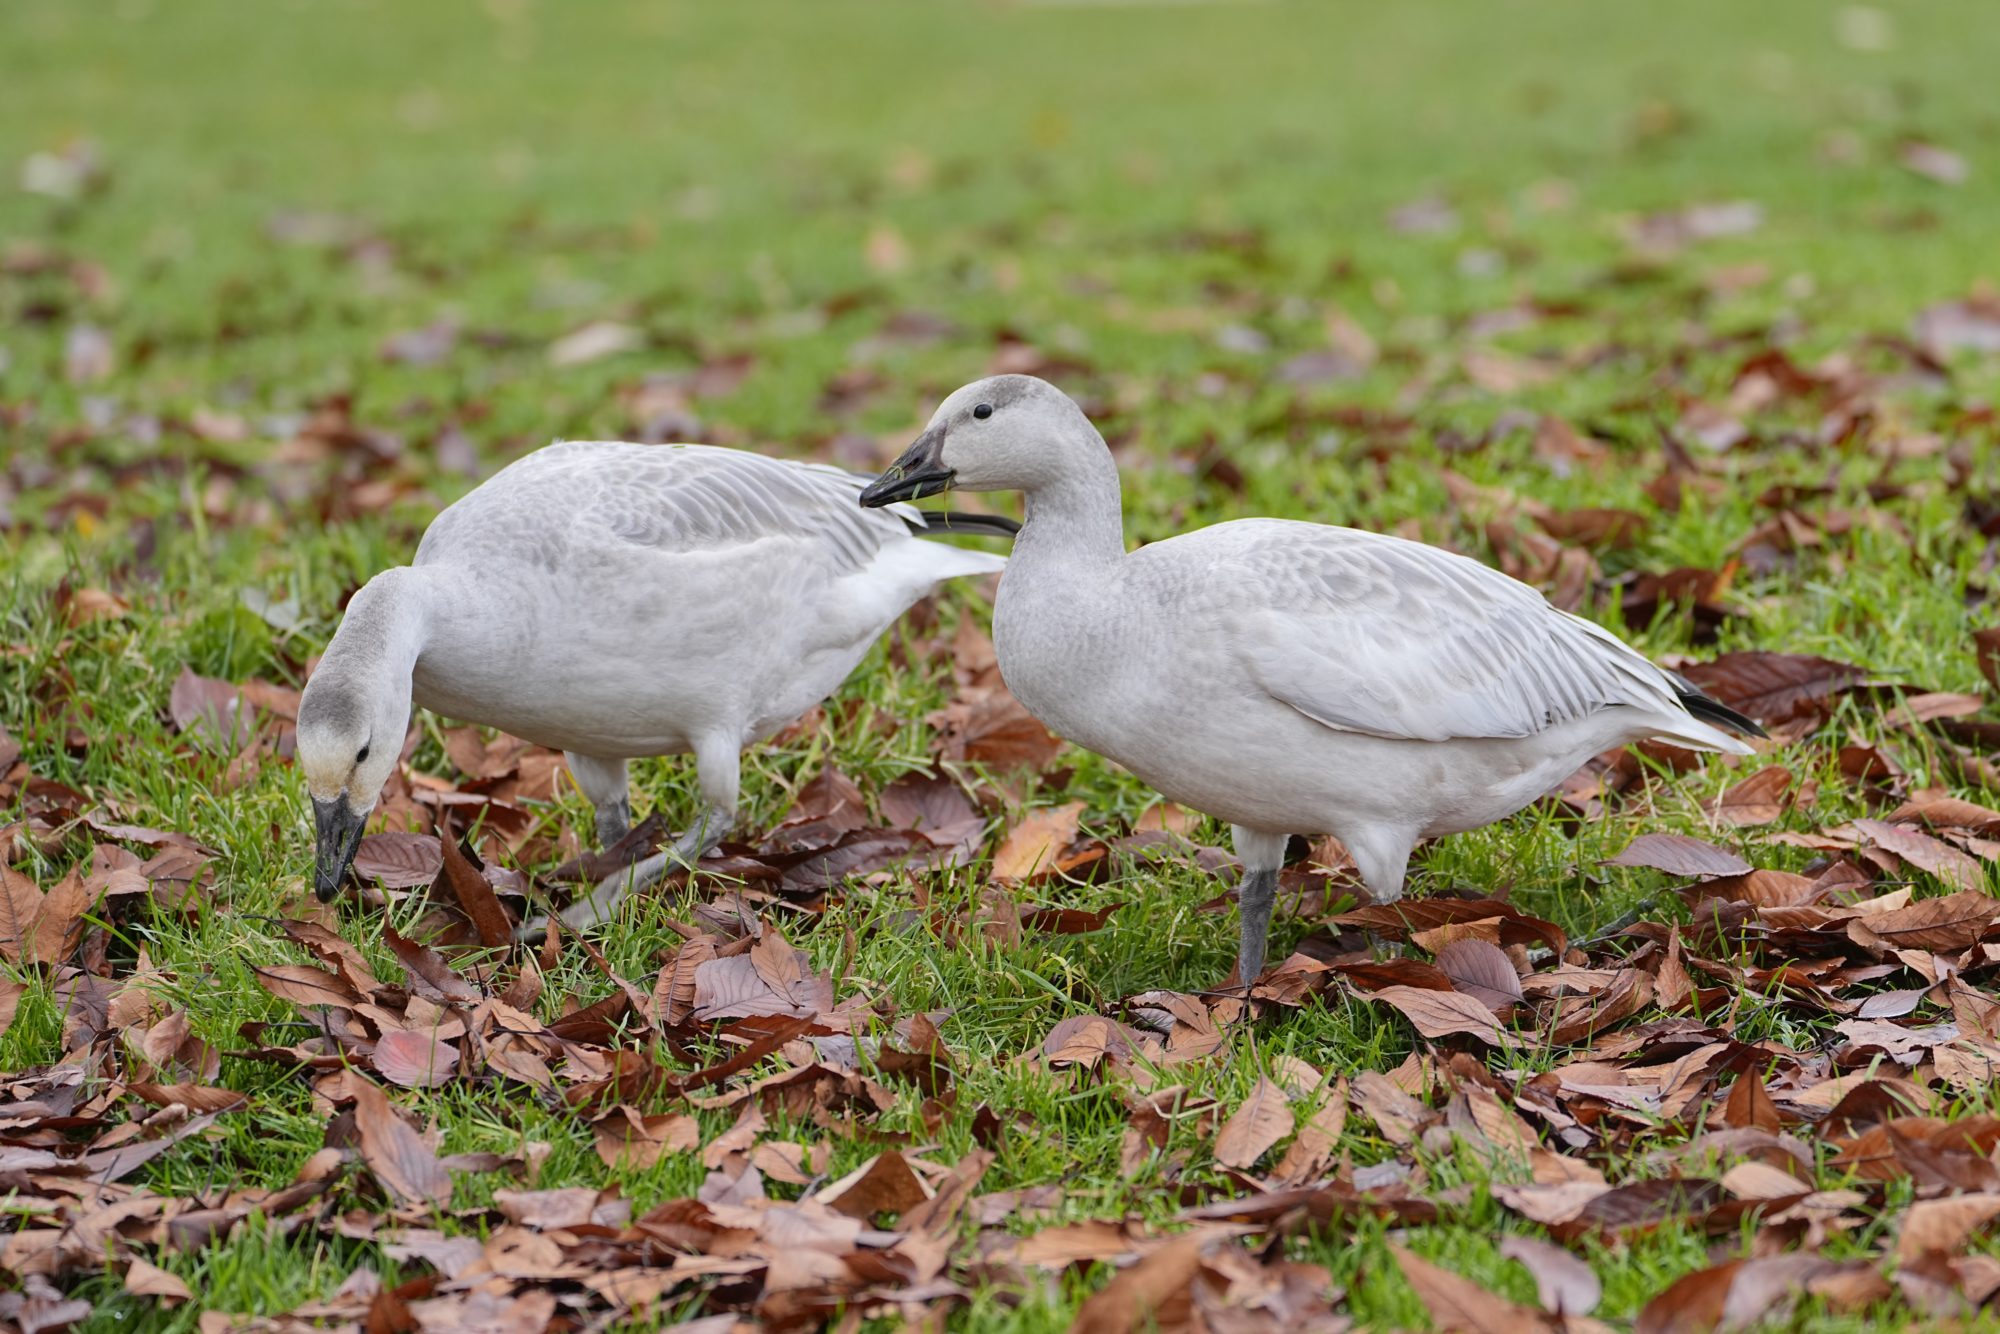 Two immature Snow Geese foraging the grass, surrounded by some dead leaves